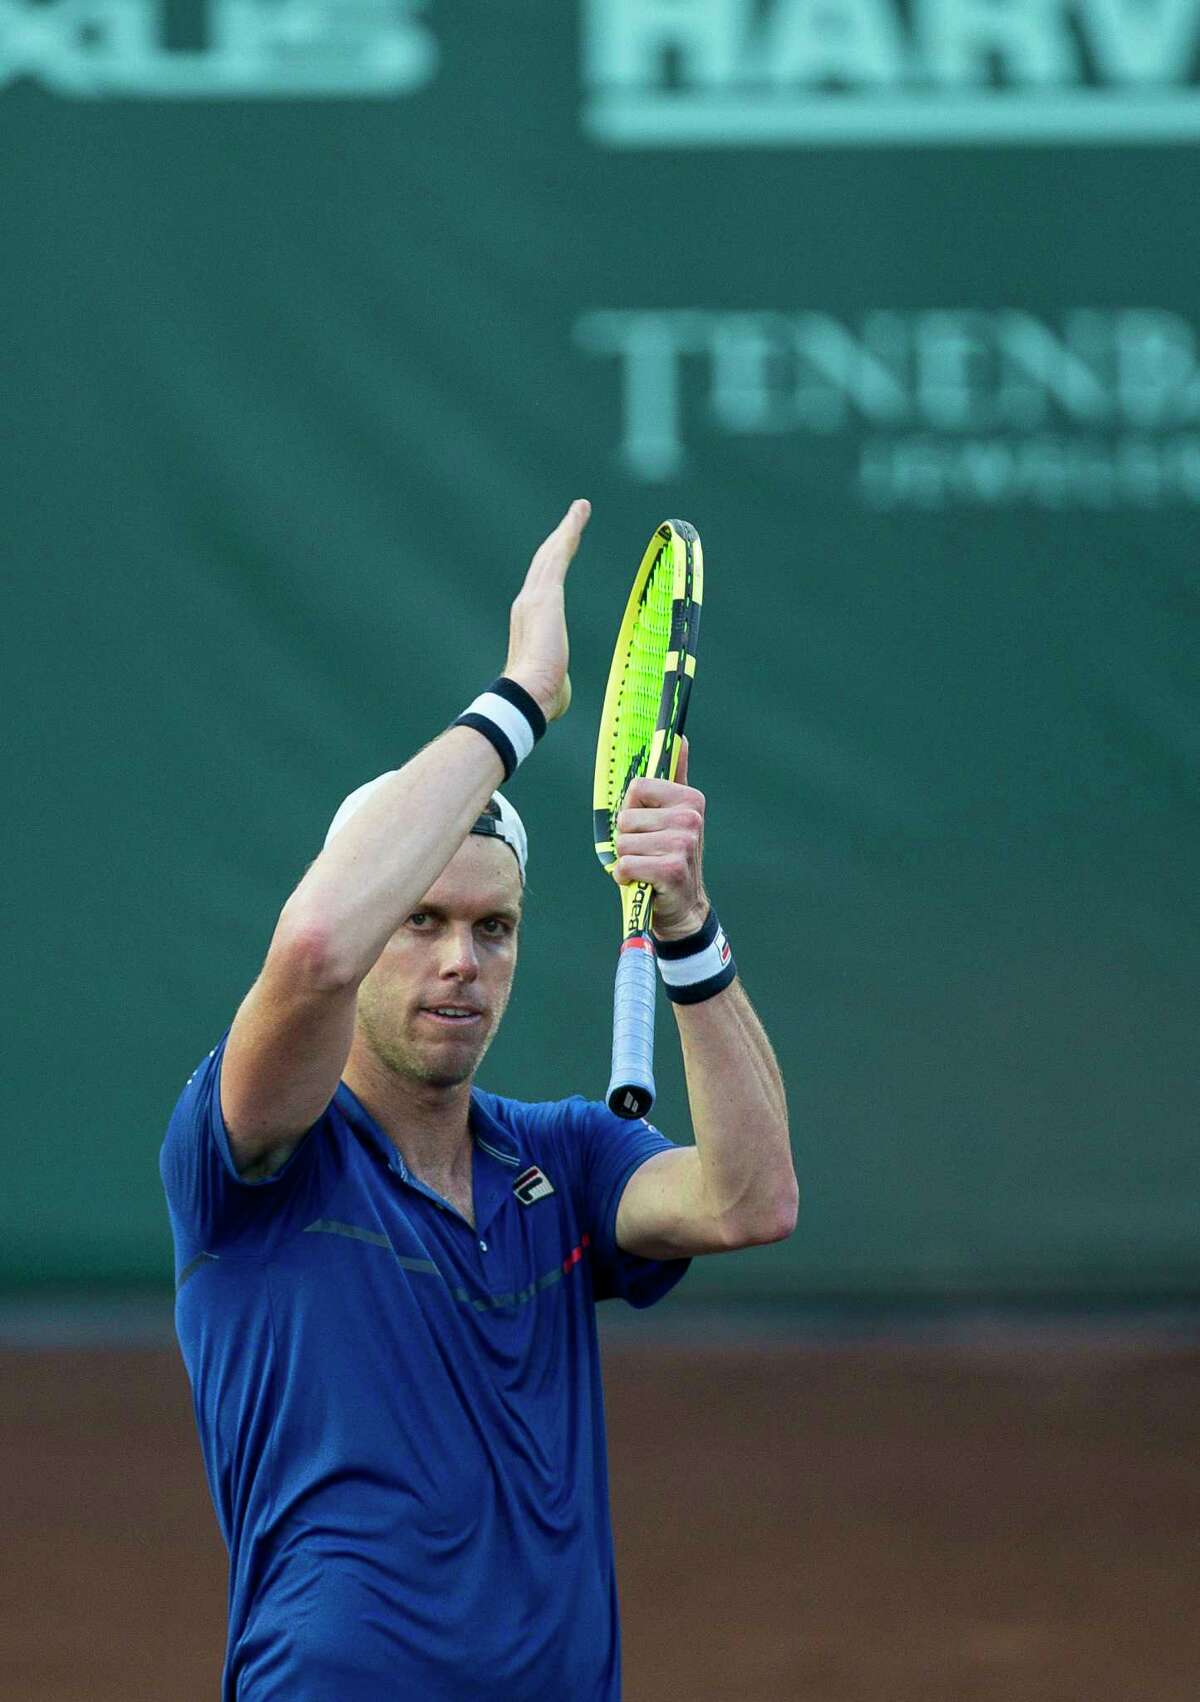 Sam Querrey celebrates his won over Bjorn Fratangelo in a first round match of the Fayez Sarofim & Co. U.S. Men's Clay Court Championship at River Oaks Country Club in Houston, Tuesday, April 9, 2019.